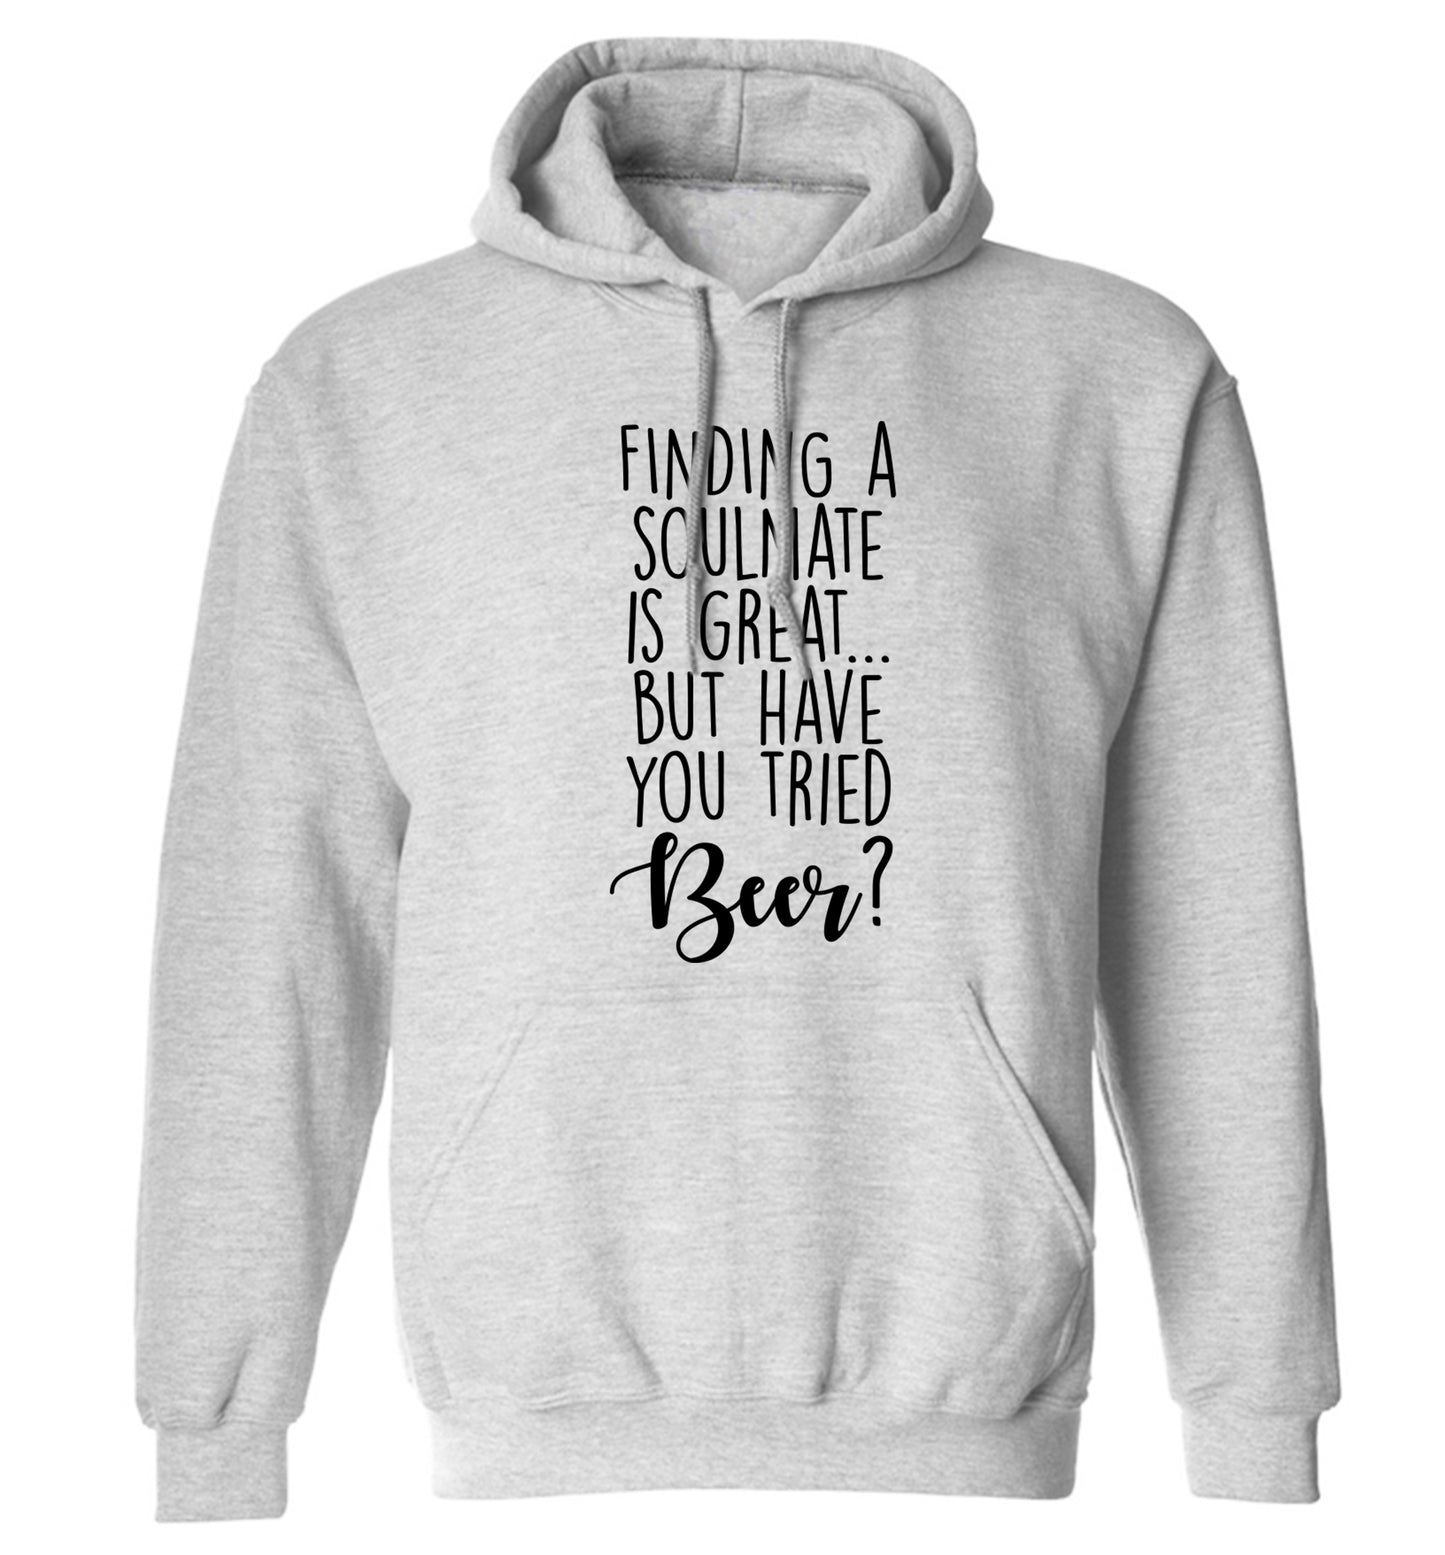 Finding a soulmate is great but have you tried beer? adults unisex grey hoodie 2XL